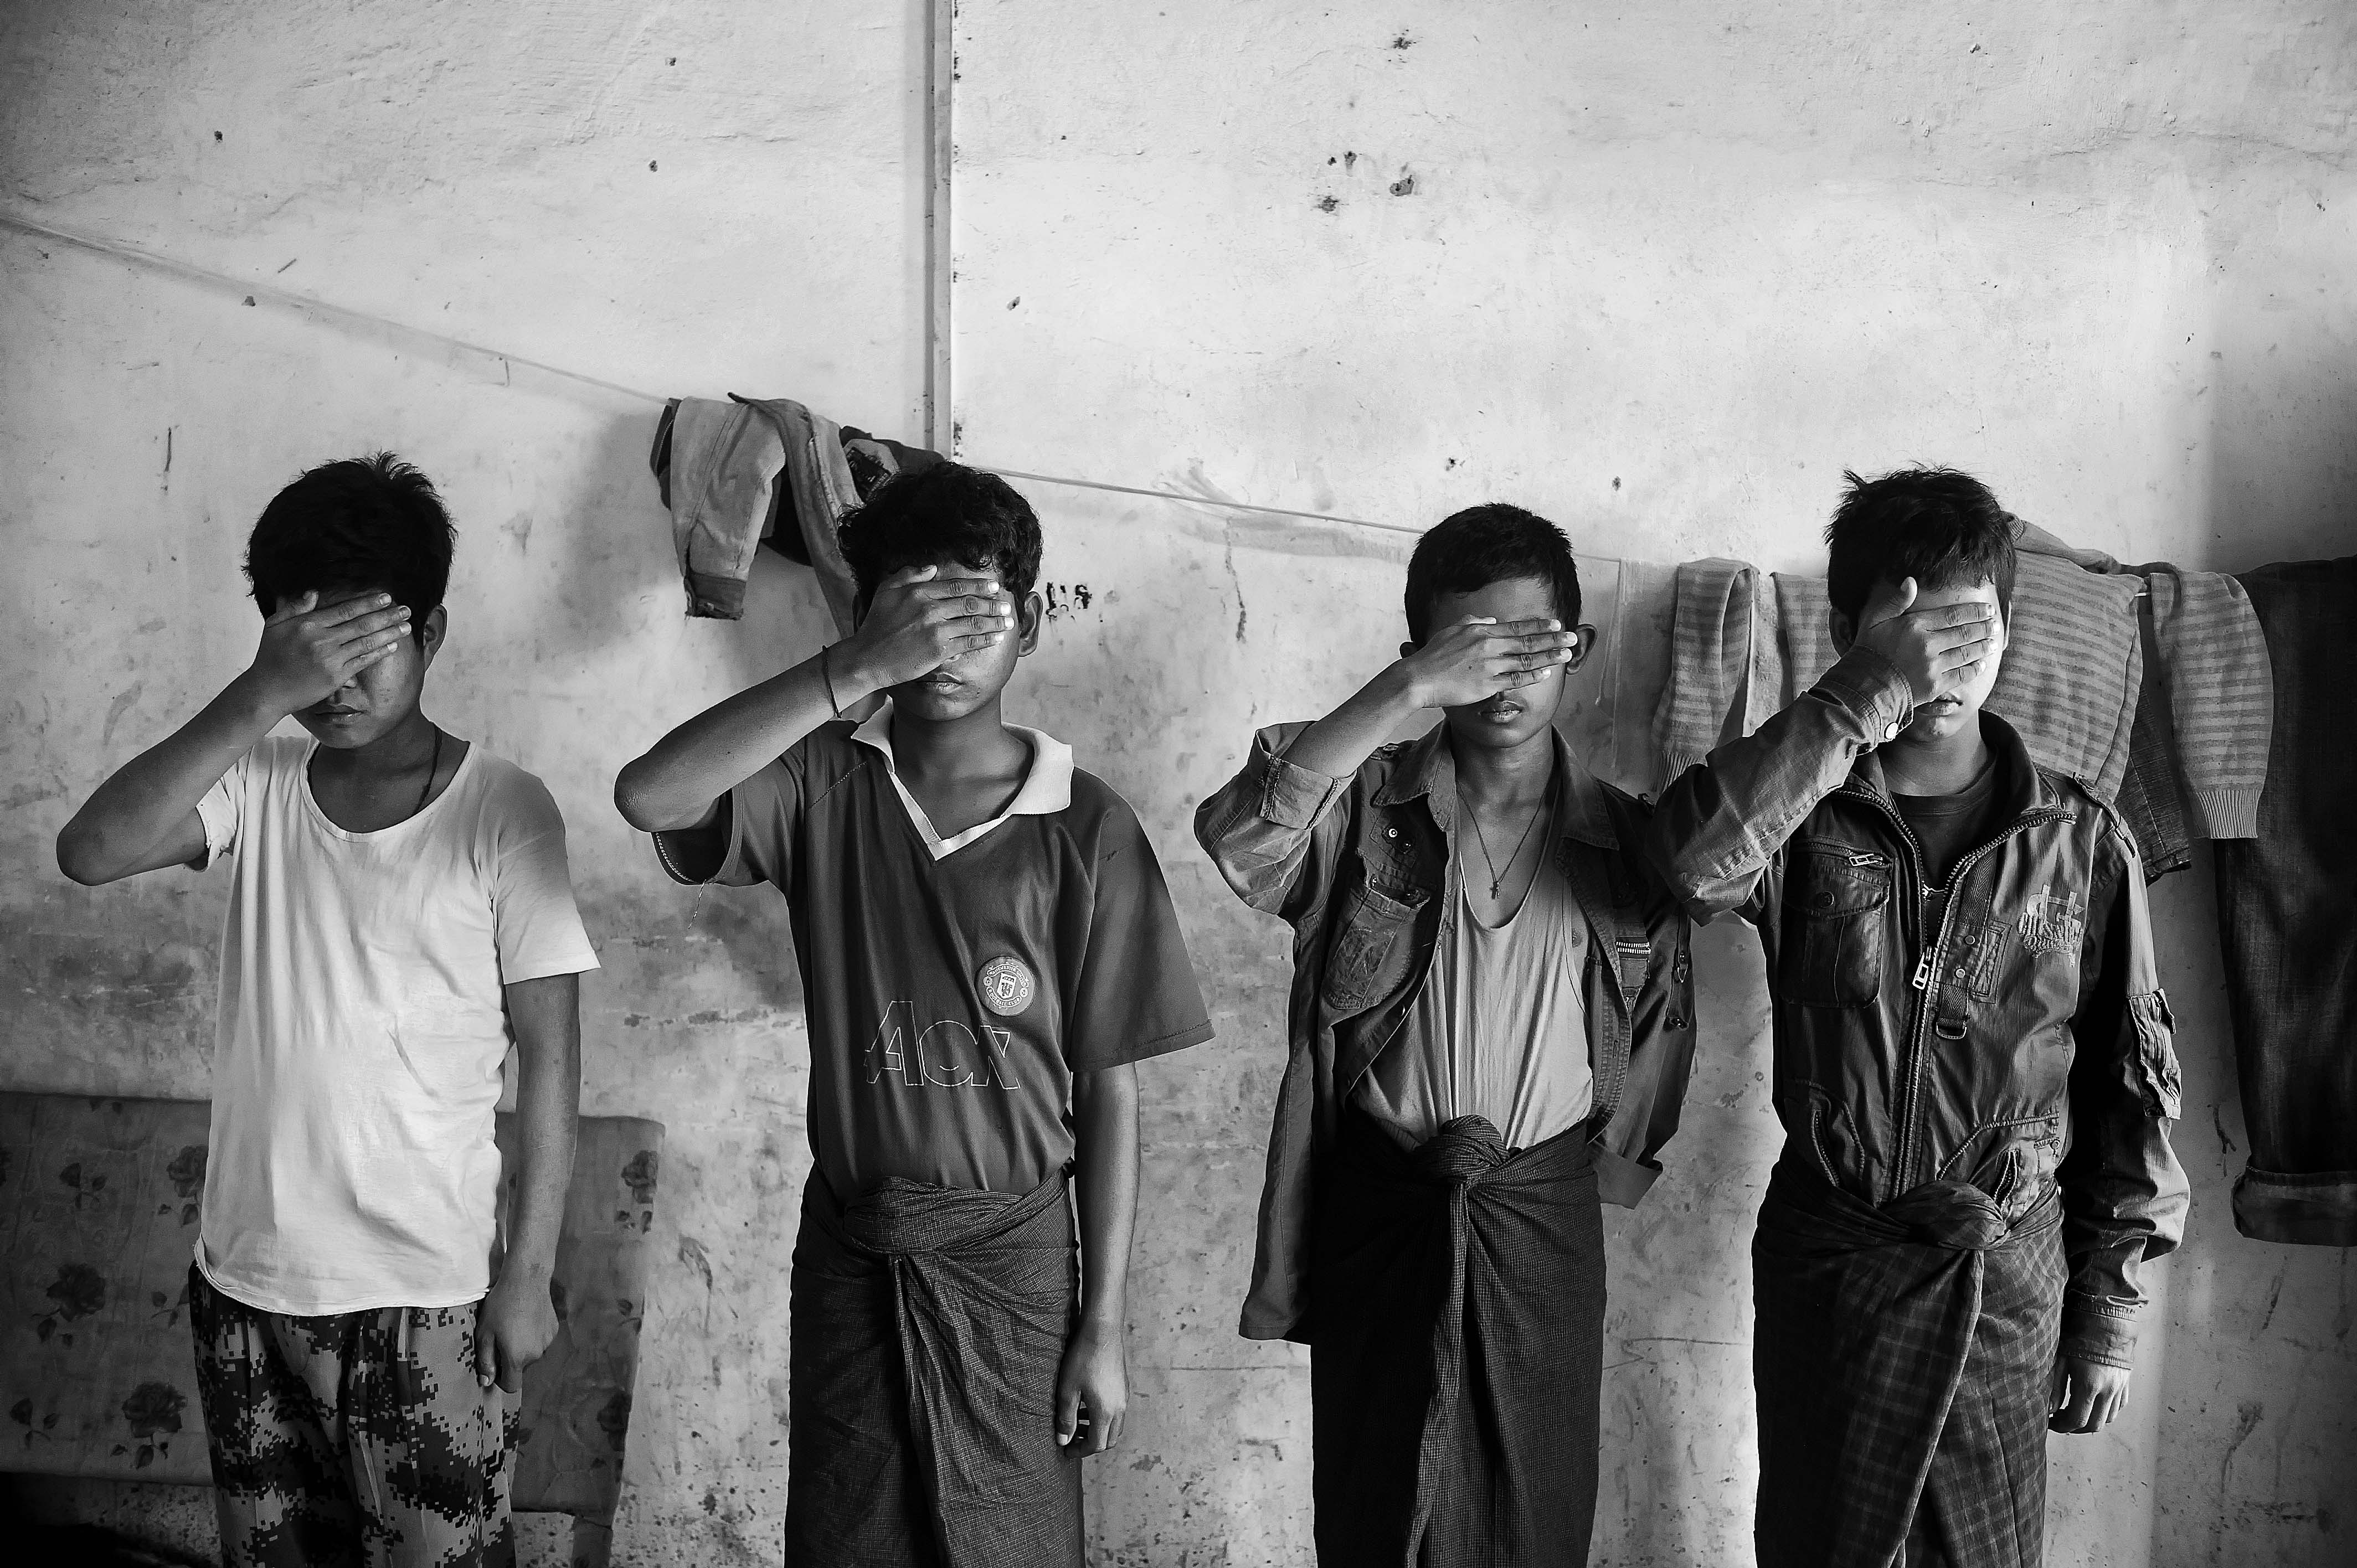 Child soldiers that deserted from the Burma Army are held in Laiza, headquarters of the Kachin Independence Army (KIA) located near the China border. The KIA has been fighting with the government since its seventeen-year ceasefire unraveled in 2011 the same year reforms were introduced.